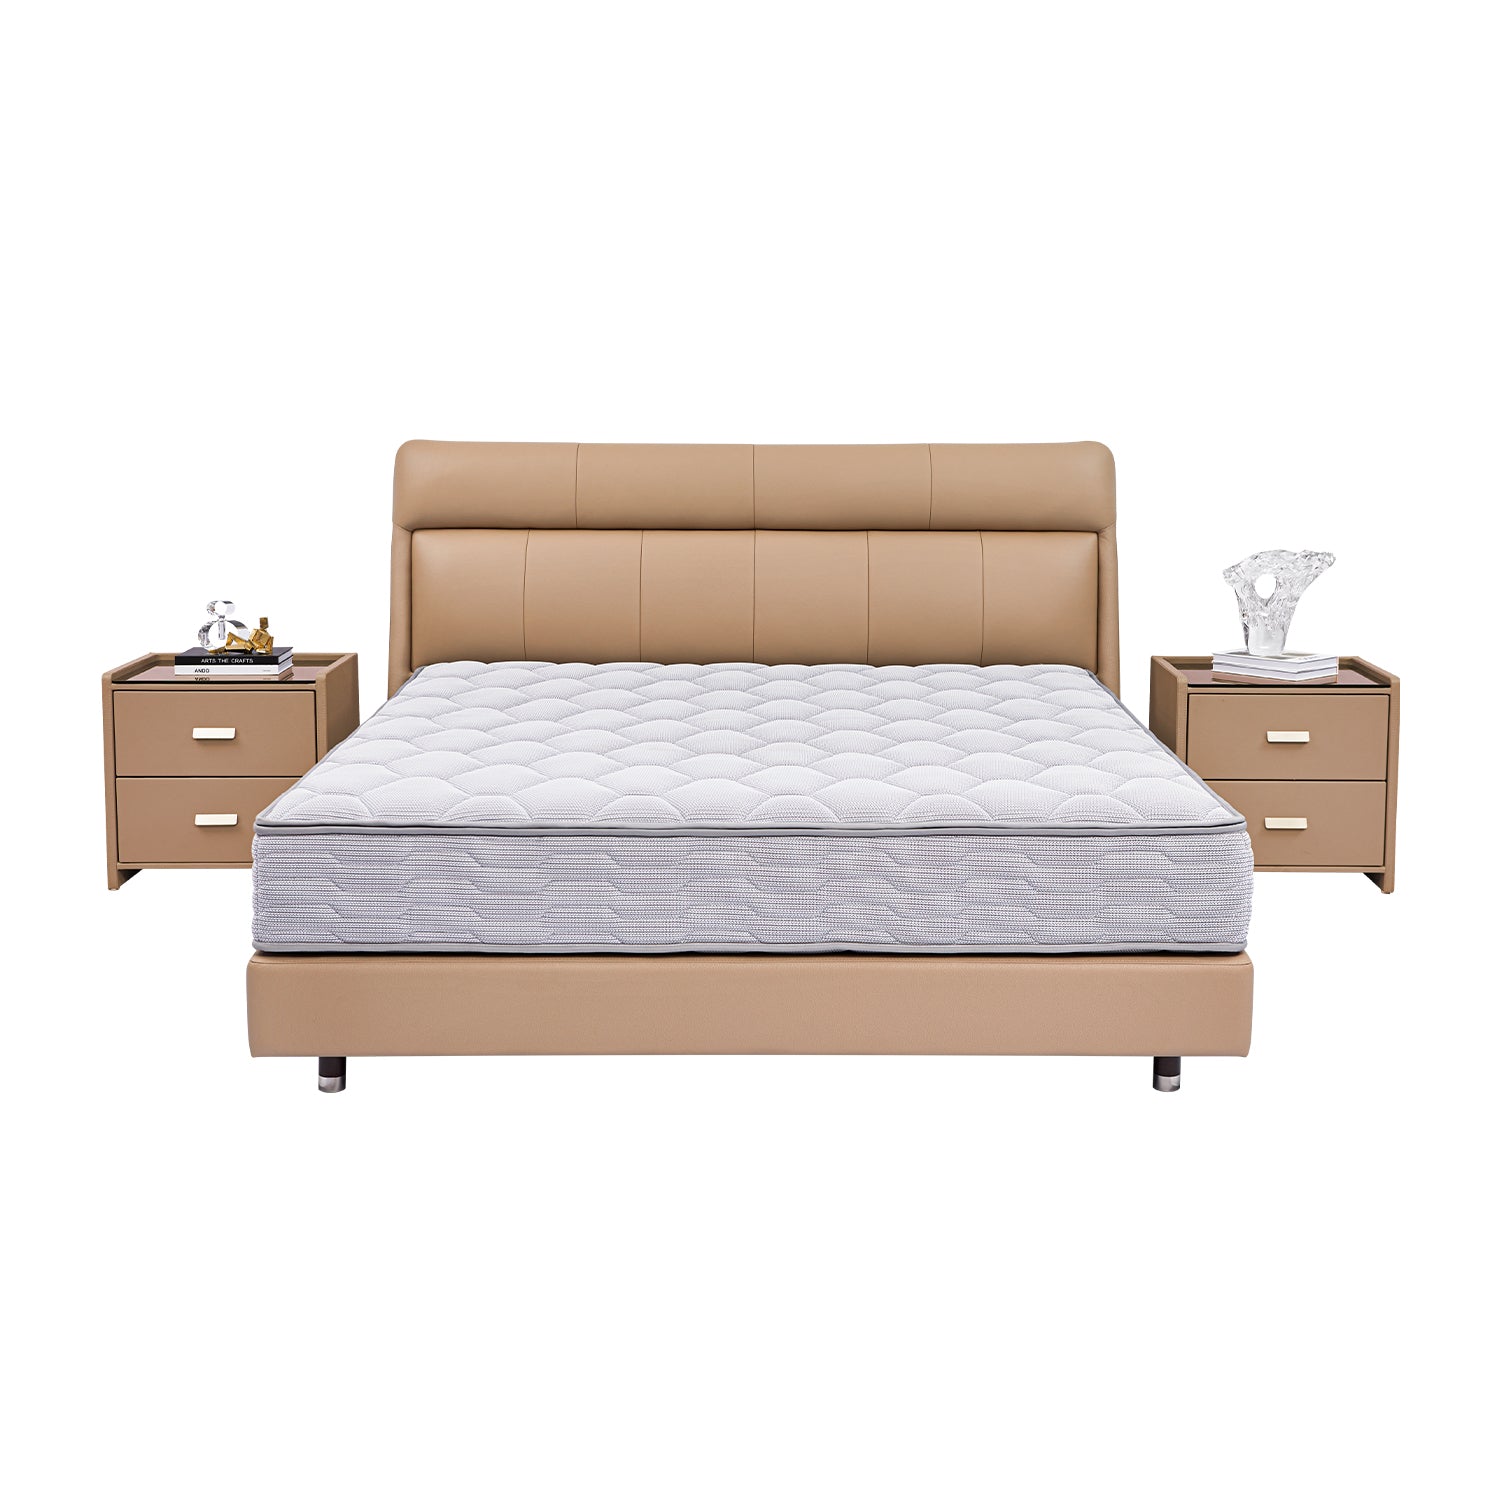 DeRUCCI beige leather bed frame BOC1 - 011 with white mattress and matching bedside tables